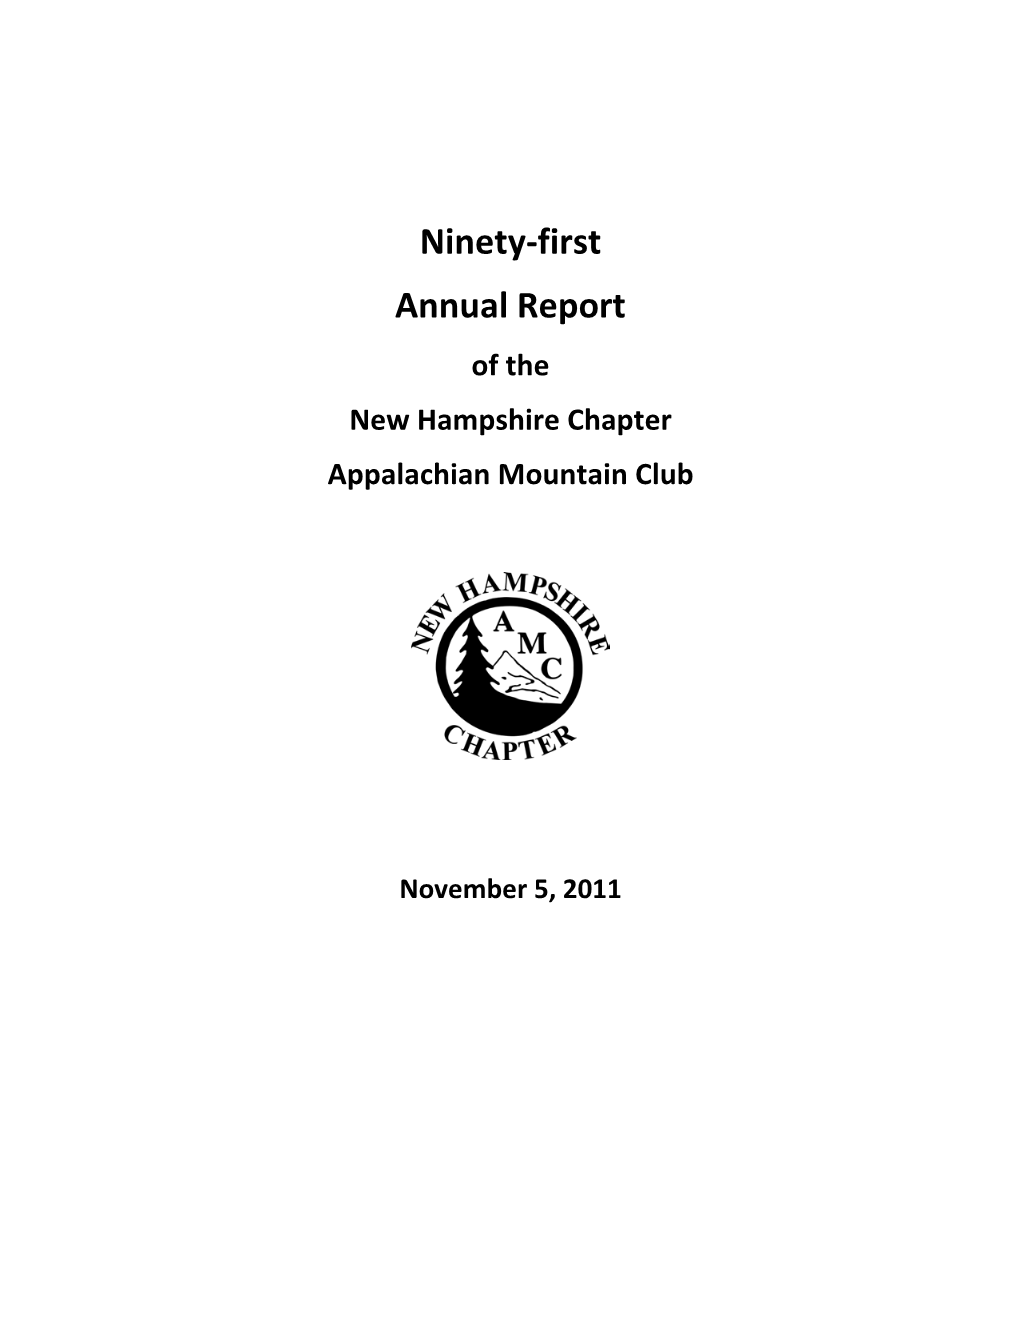 AMC NH Chapter 87Th Annual Report 2007